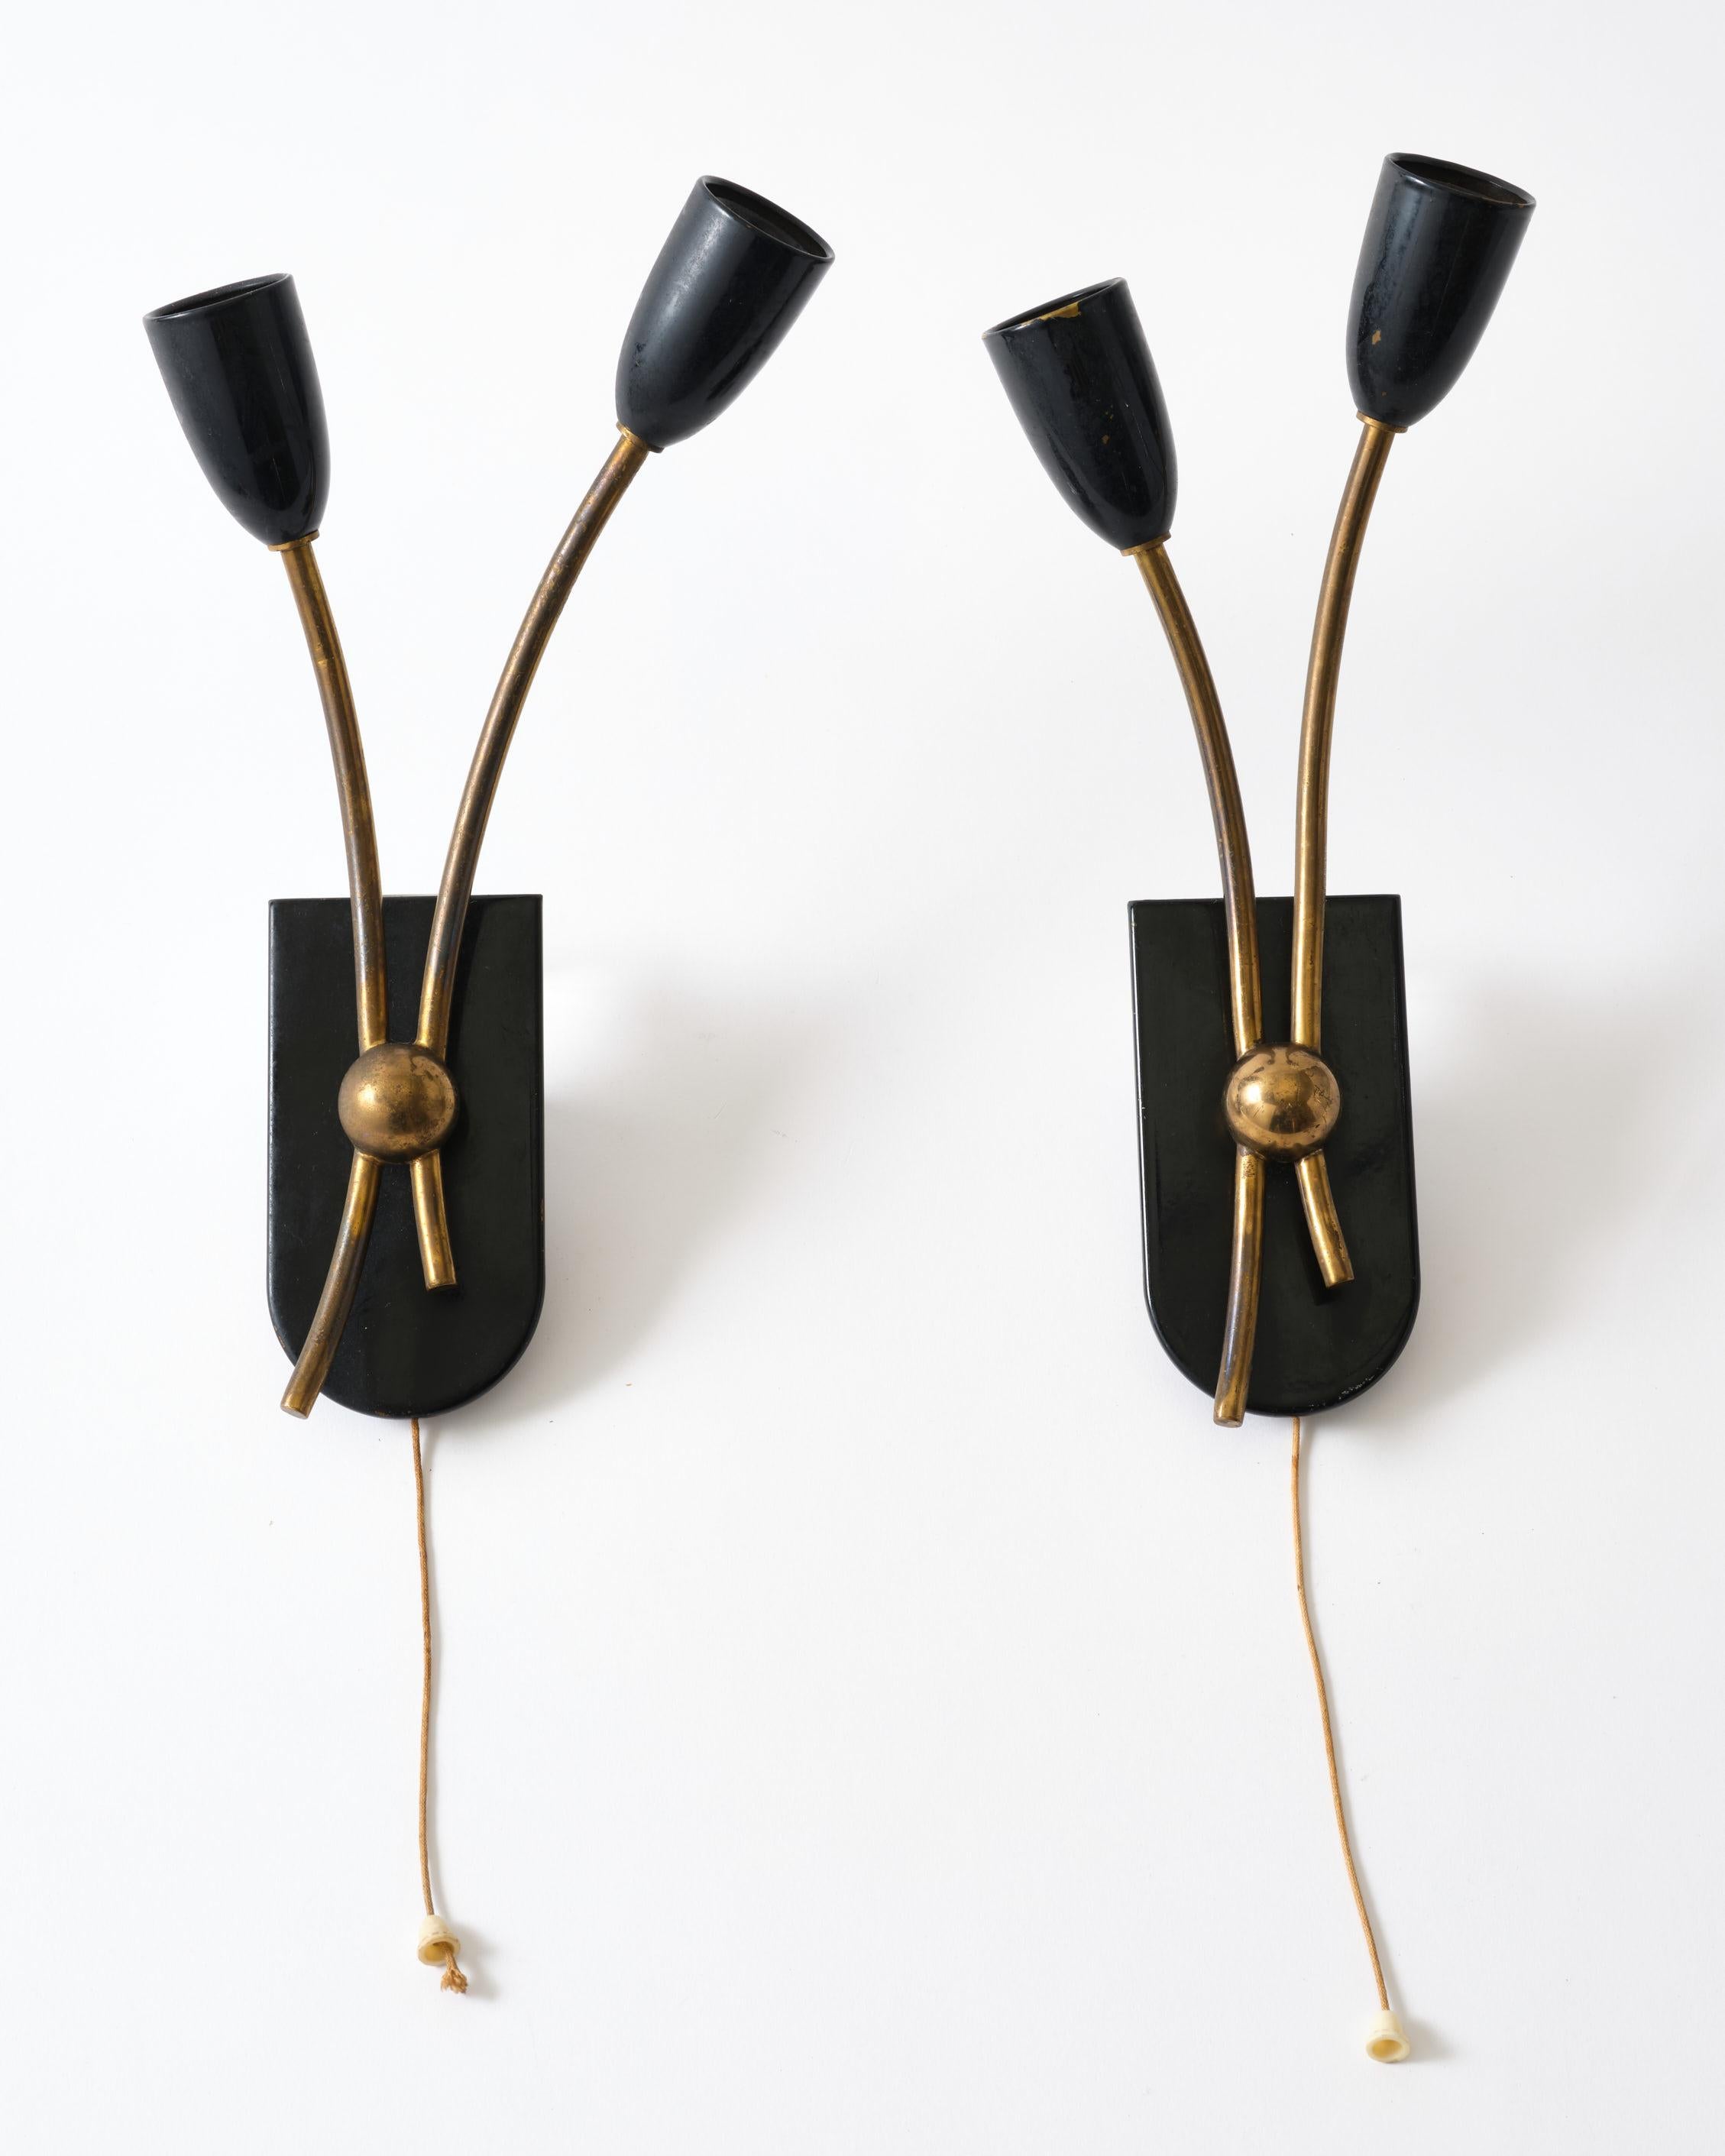 Mid-century brass and metal pair of sconces from Italy, C 1950. Very charming set.
Original condition. The brass can be polished.
Each lamp is 11.75